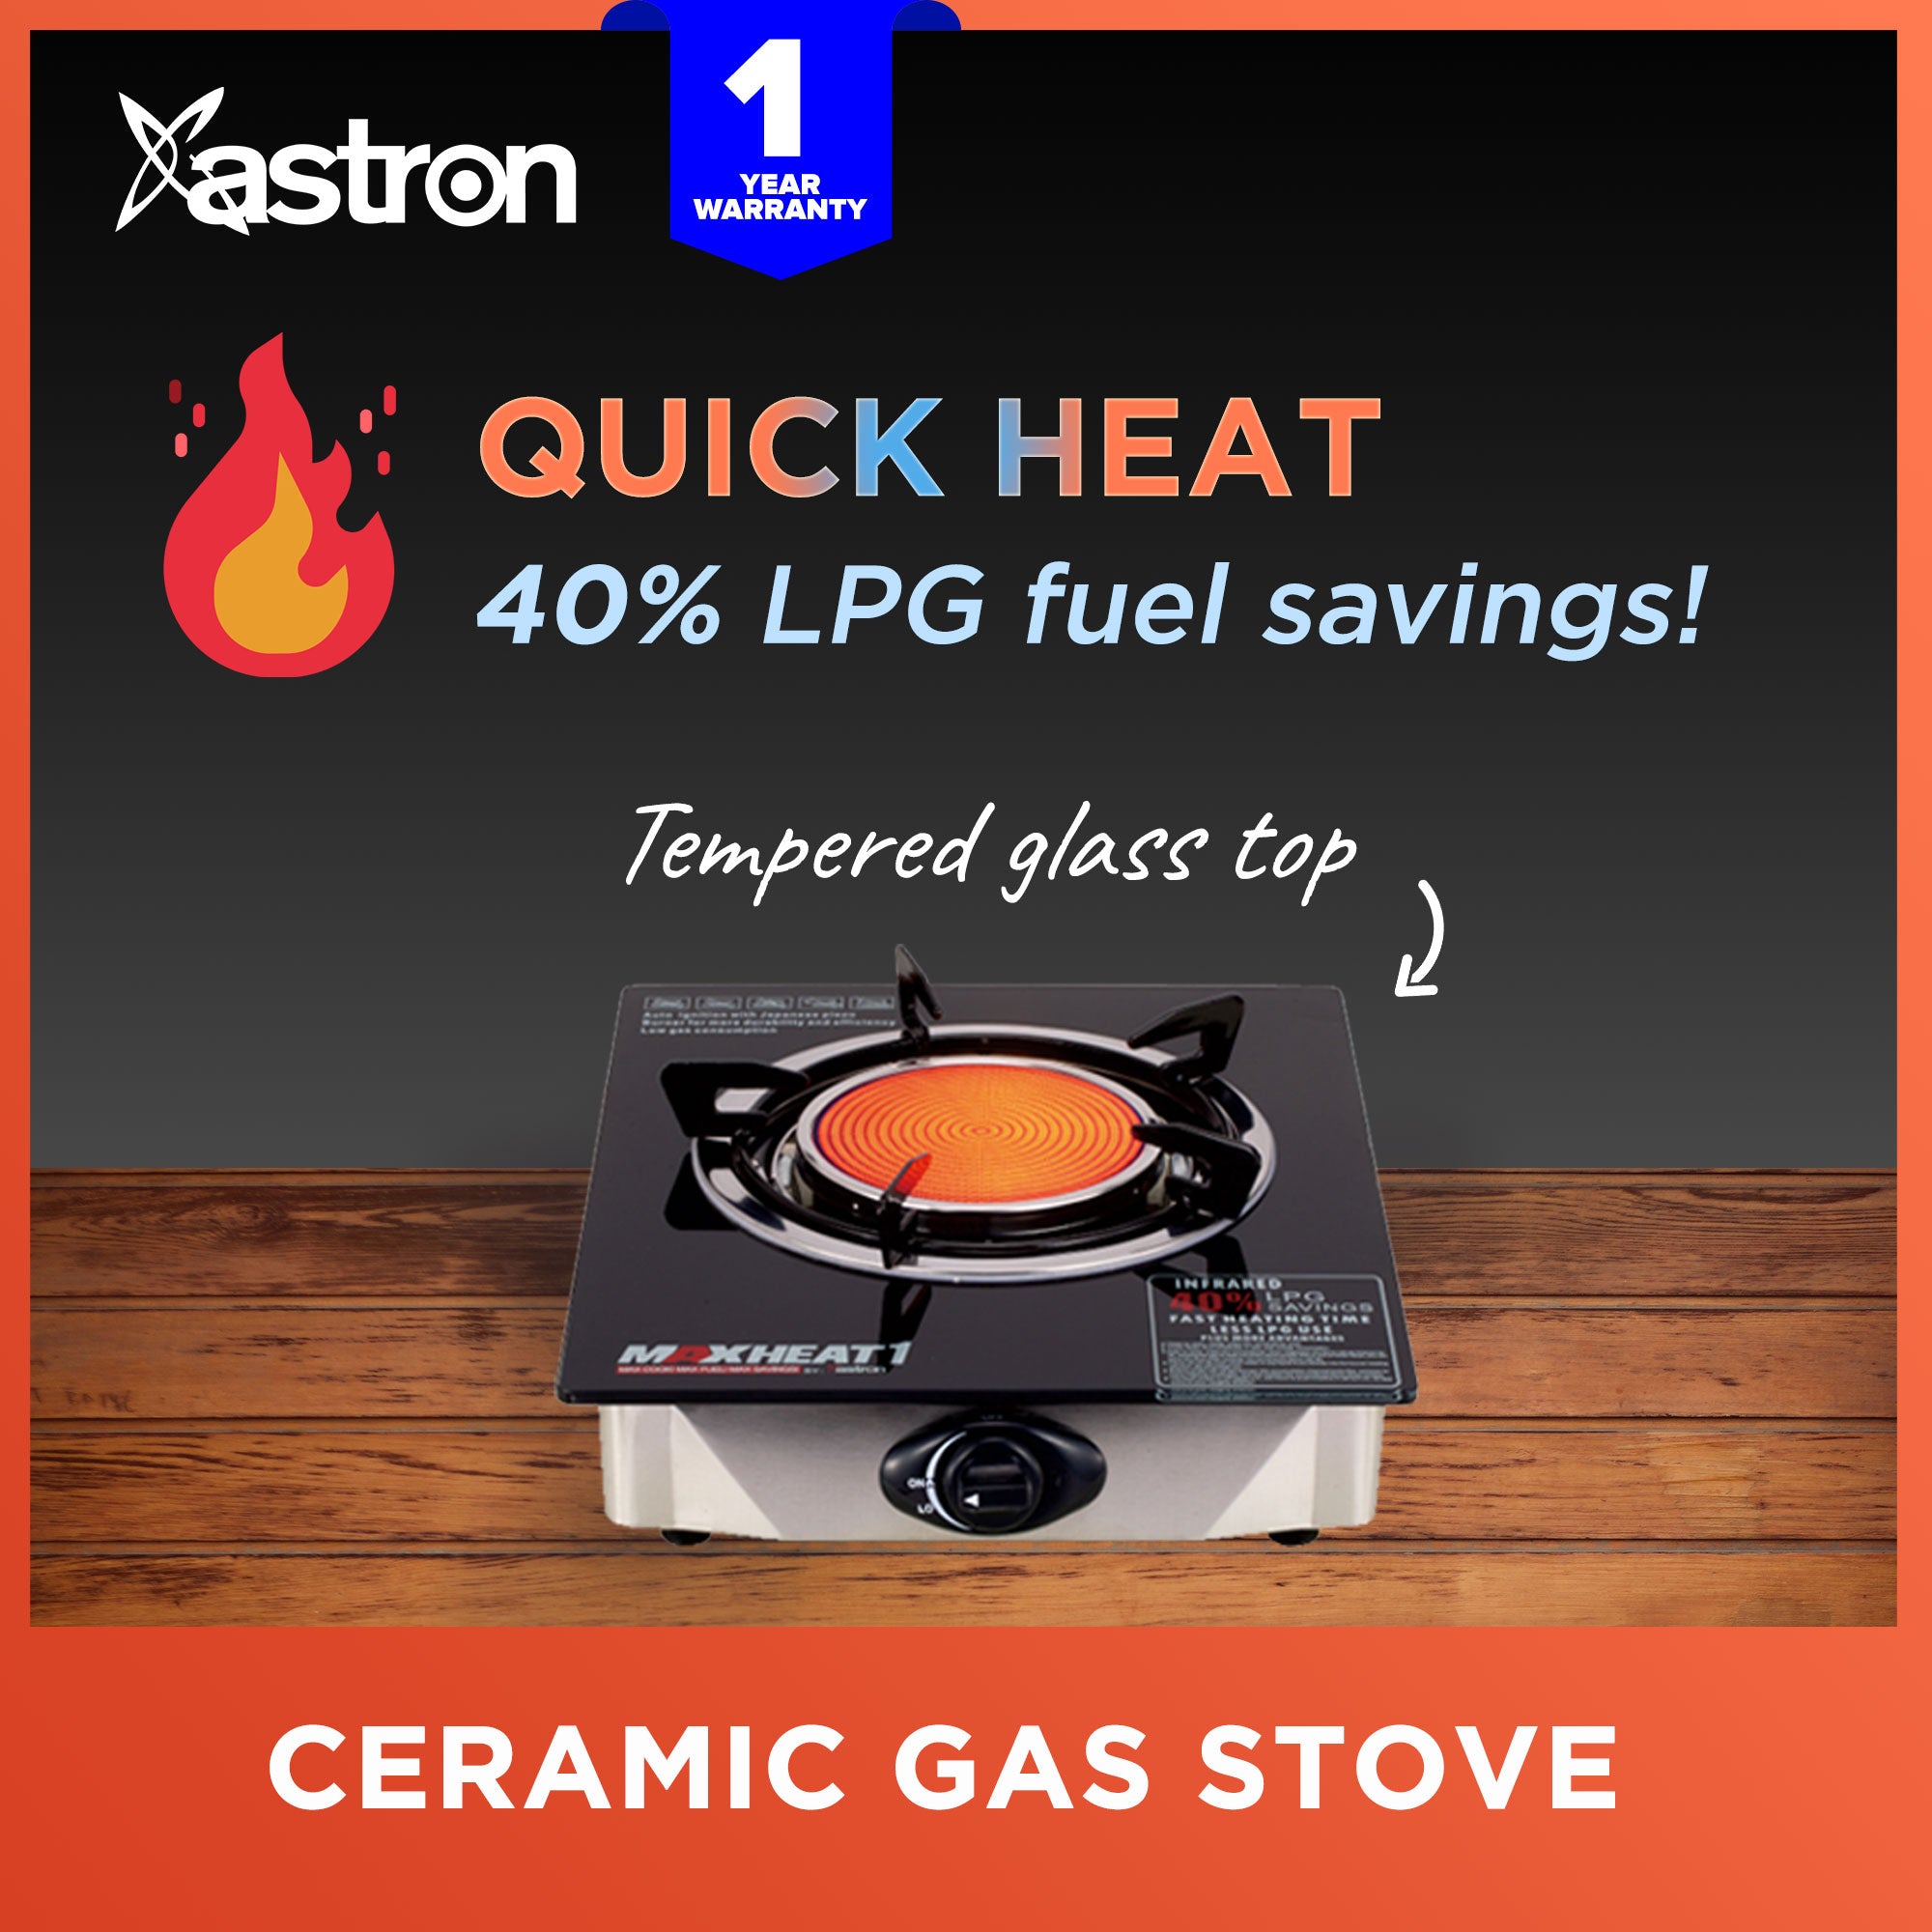 ASTRON MAXHEAT1 Single Burner Ceramic Gas Stove with Tempered Glass Top Infrared Burner Astron